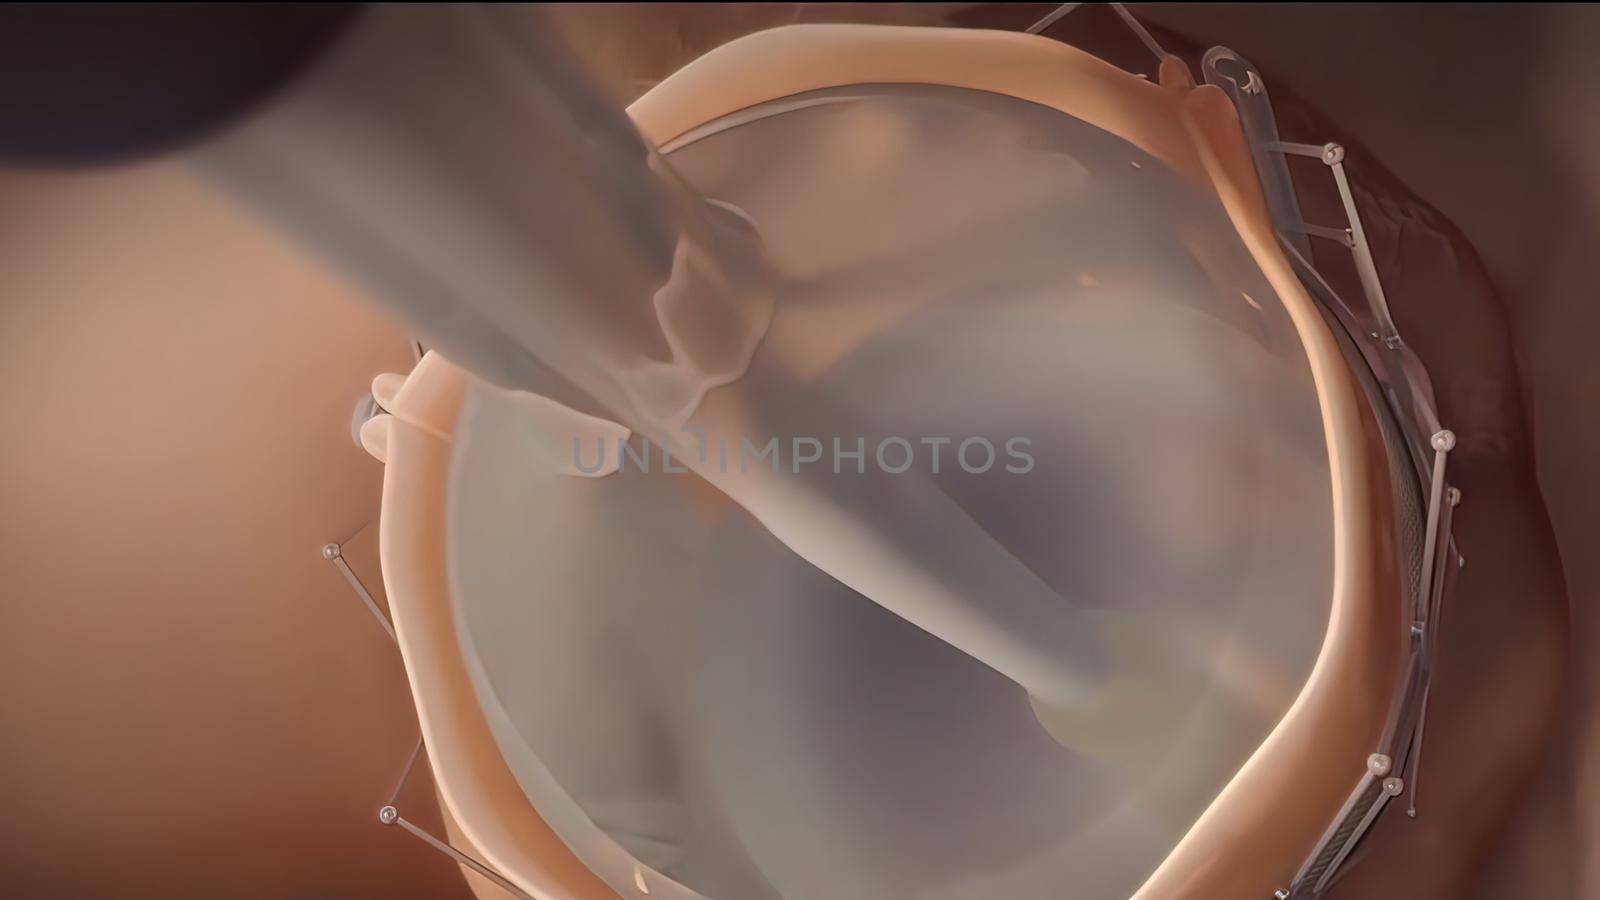 An artificial heart valve is inserted instead of a dysfunctional heart valve. 3D illustration